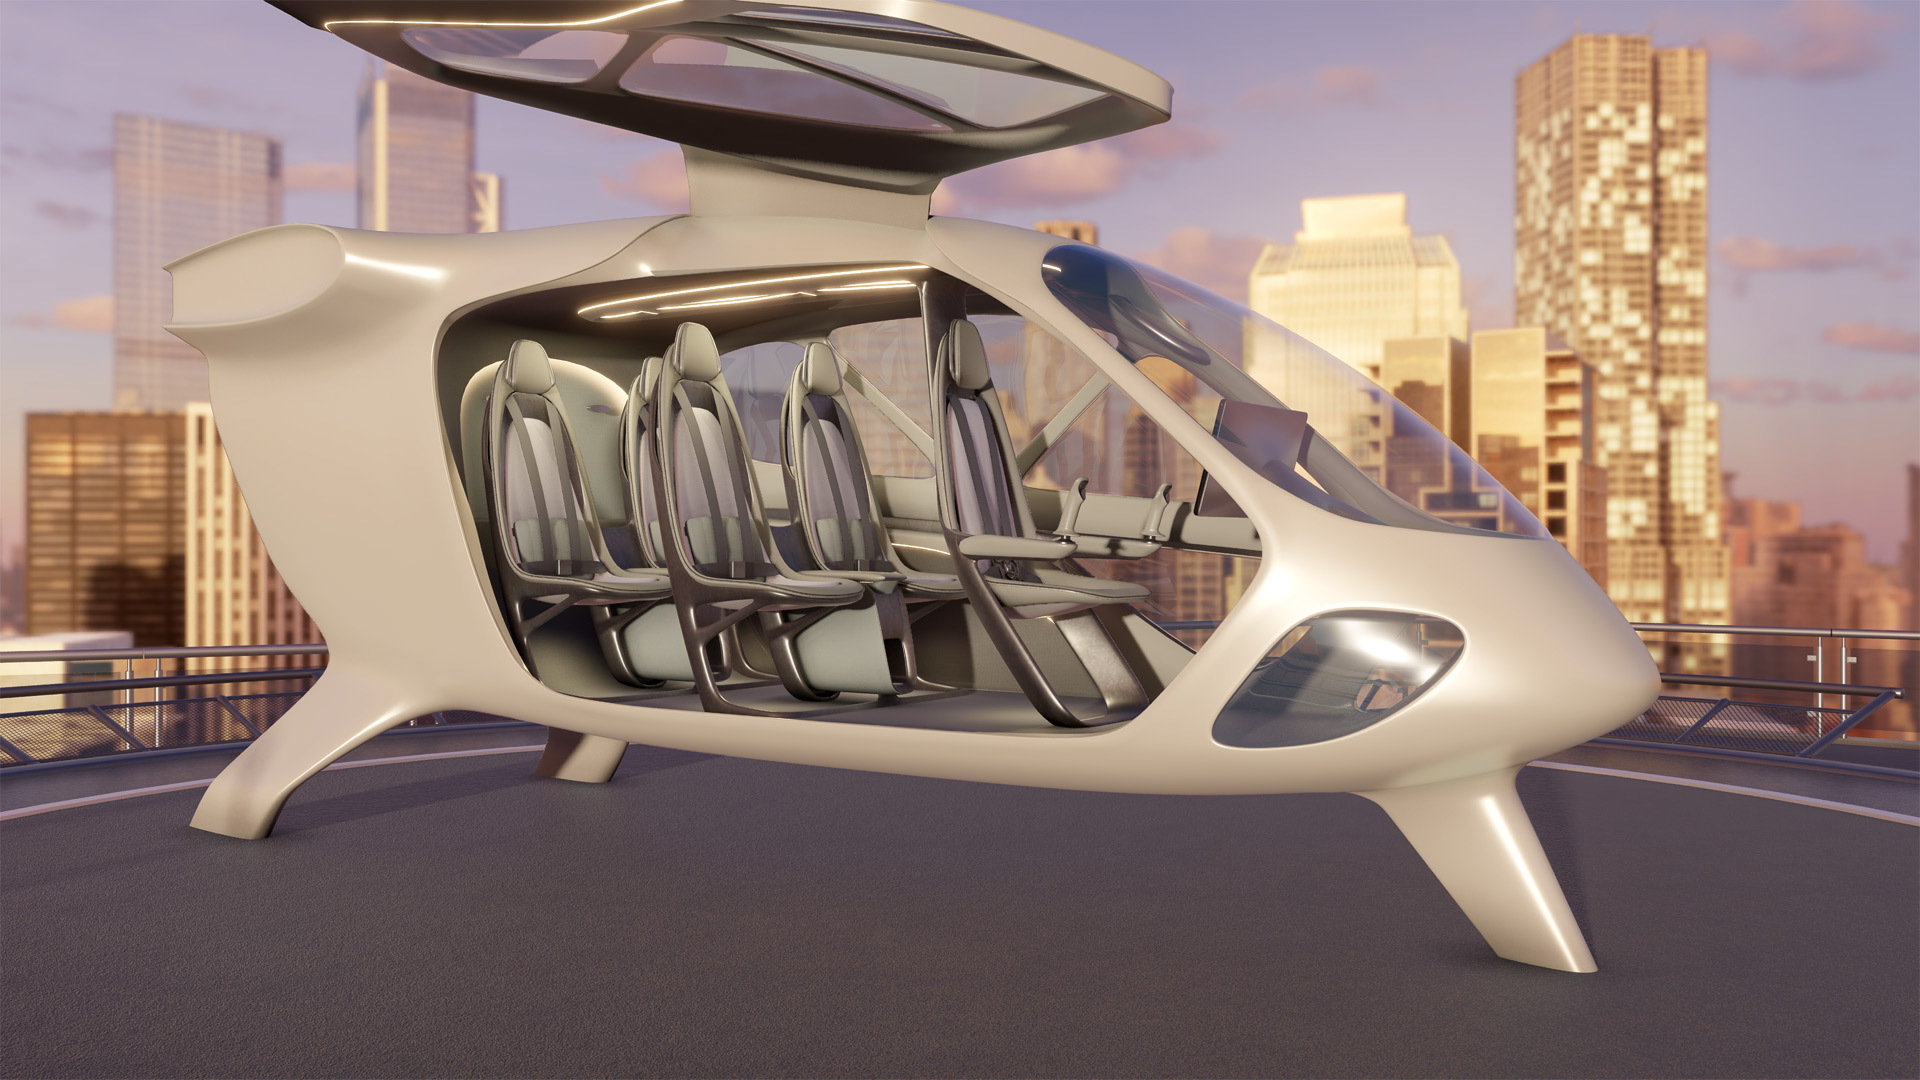 Supernal flying taxi cabin concept